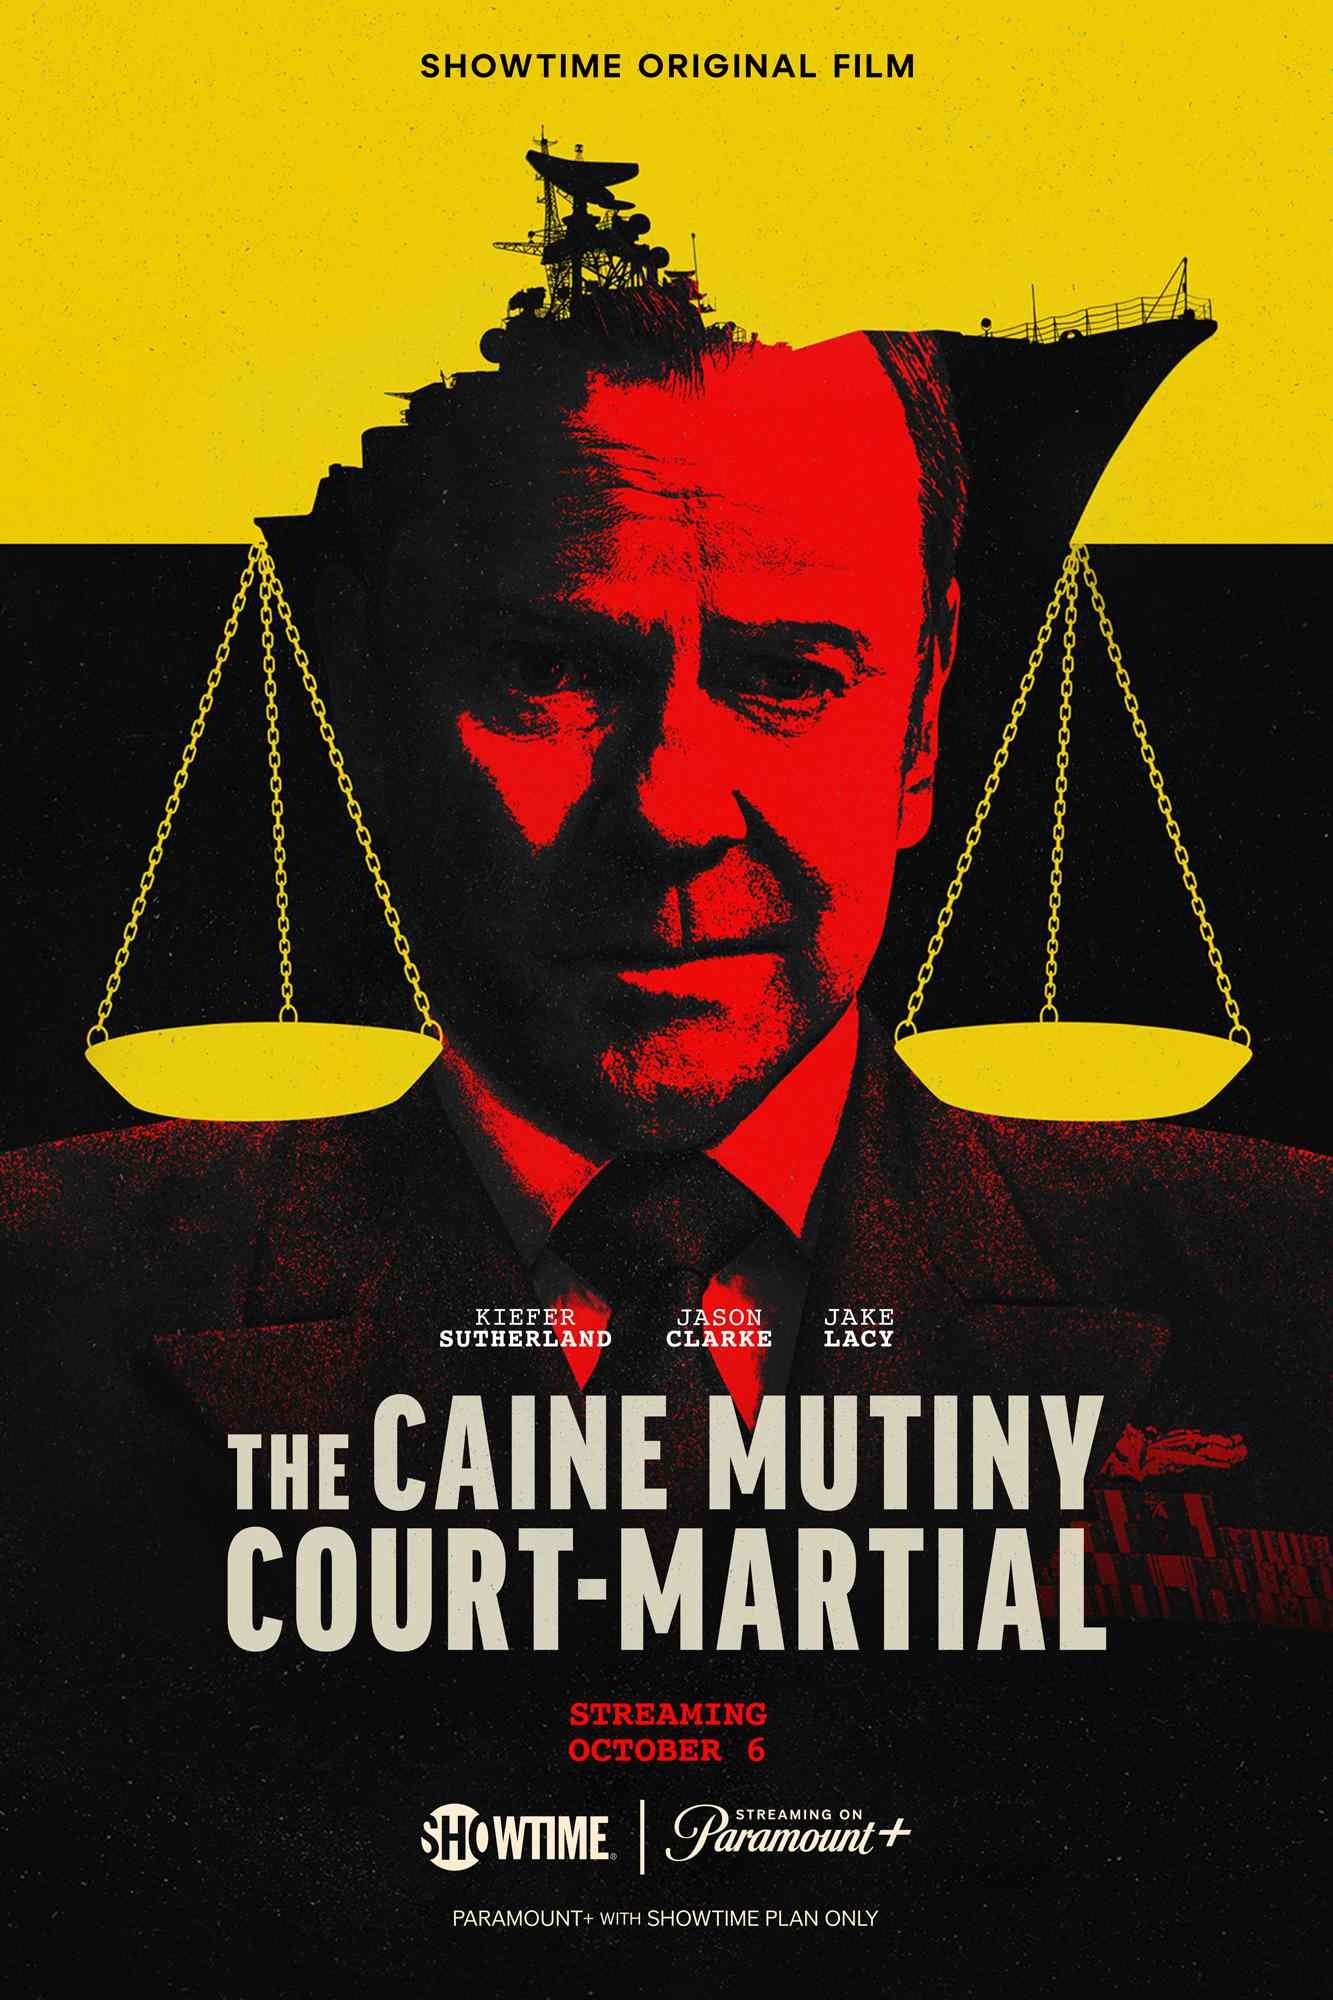 Ther Caine Mutiny Court Martial Trailer & Poster